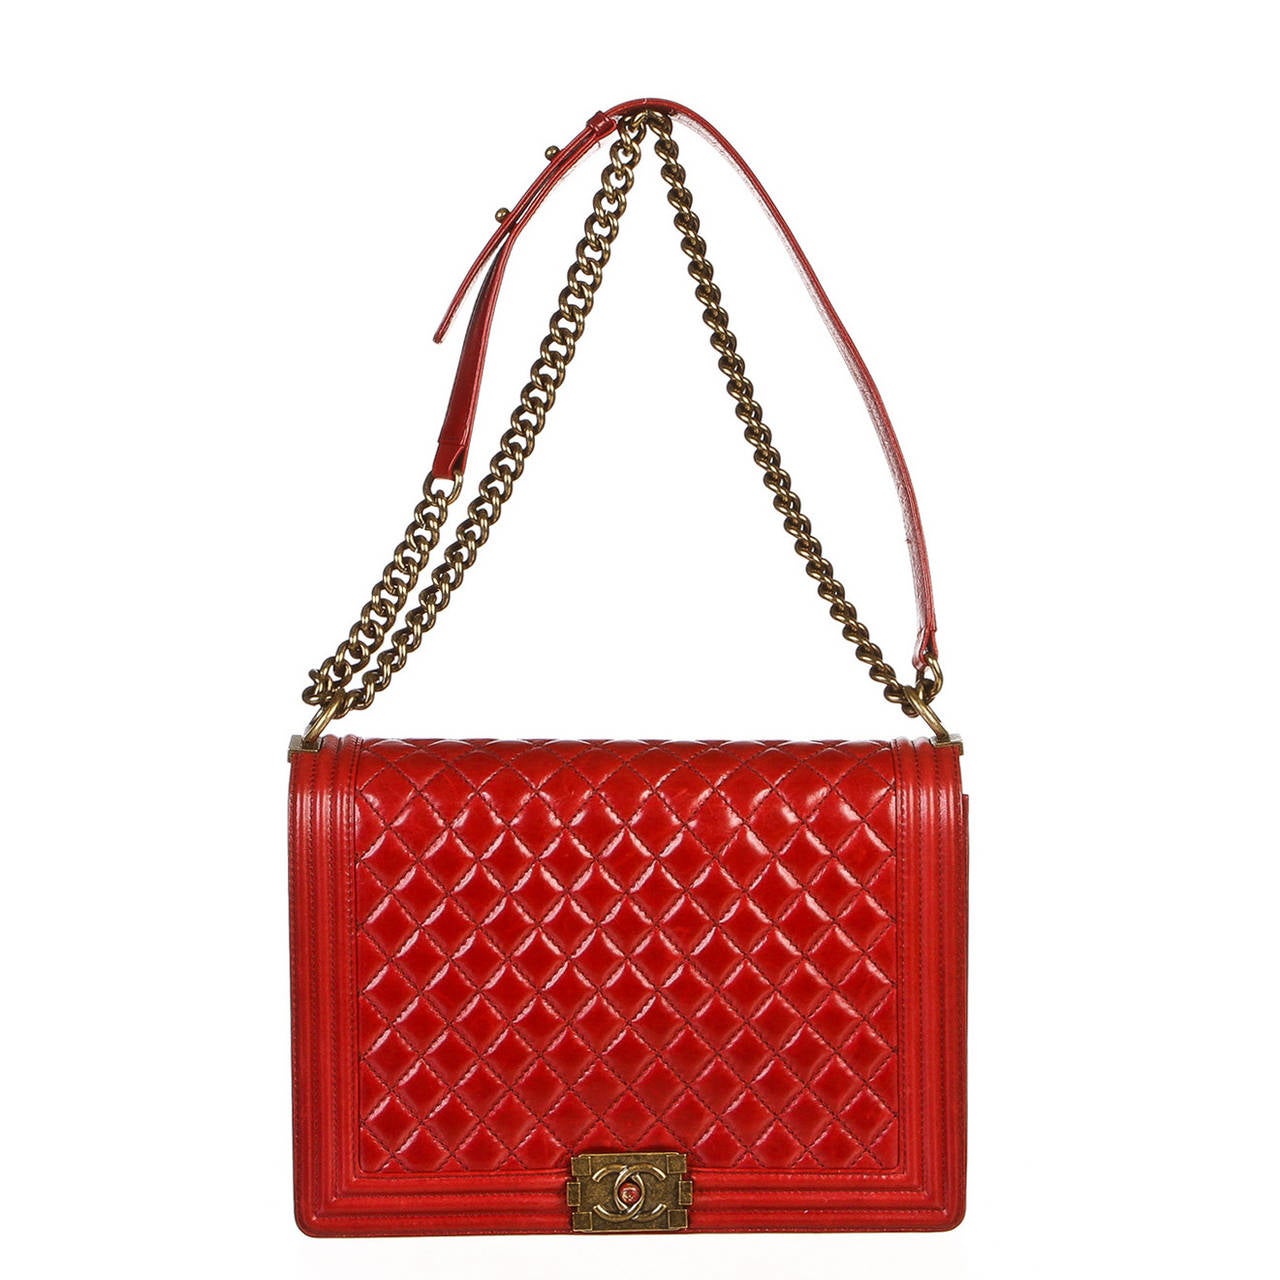 Chanel Red Quilted Distressed Leather Boy Bag Handbag For Sale